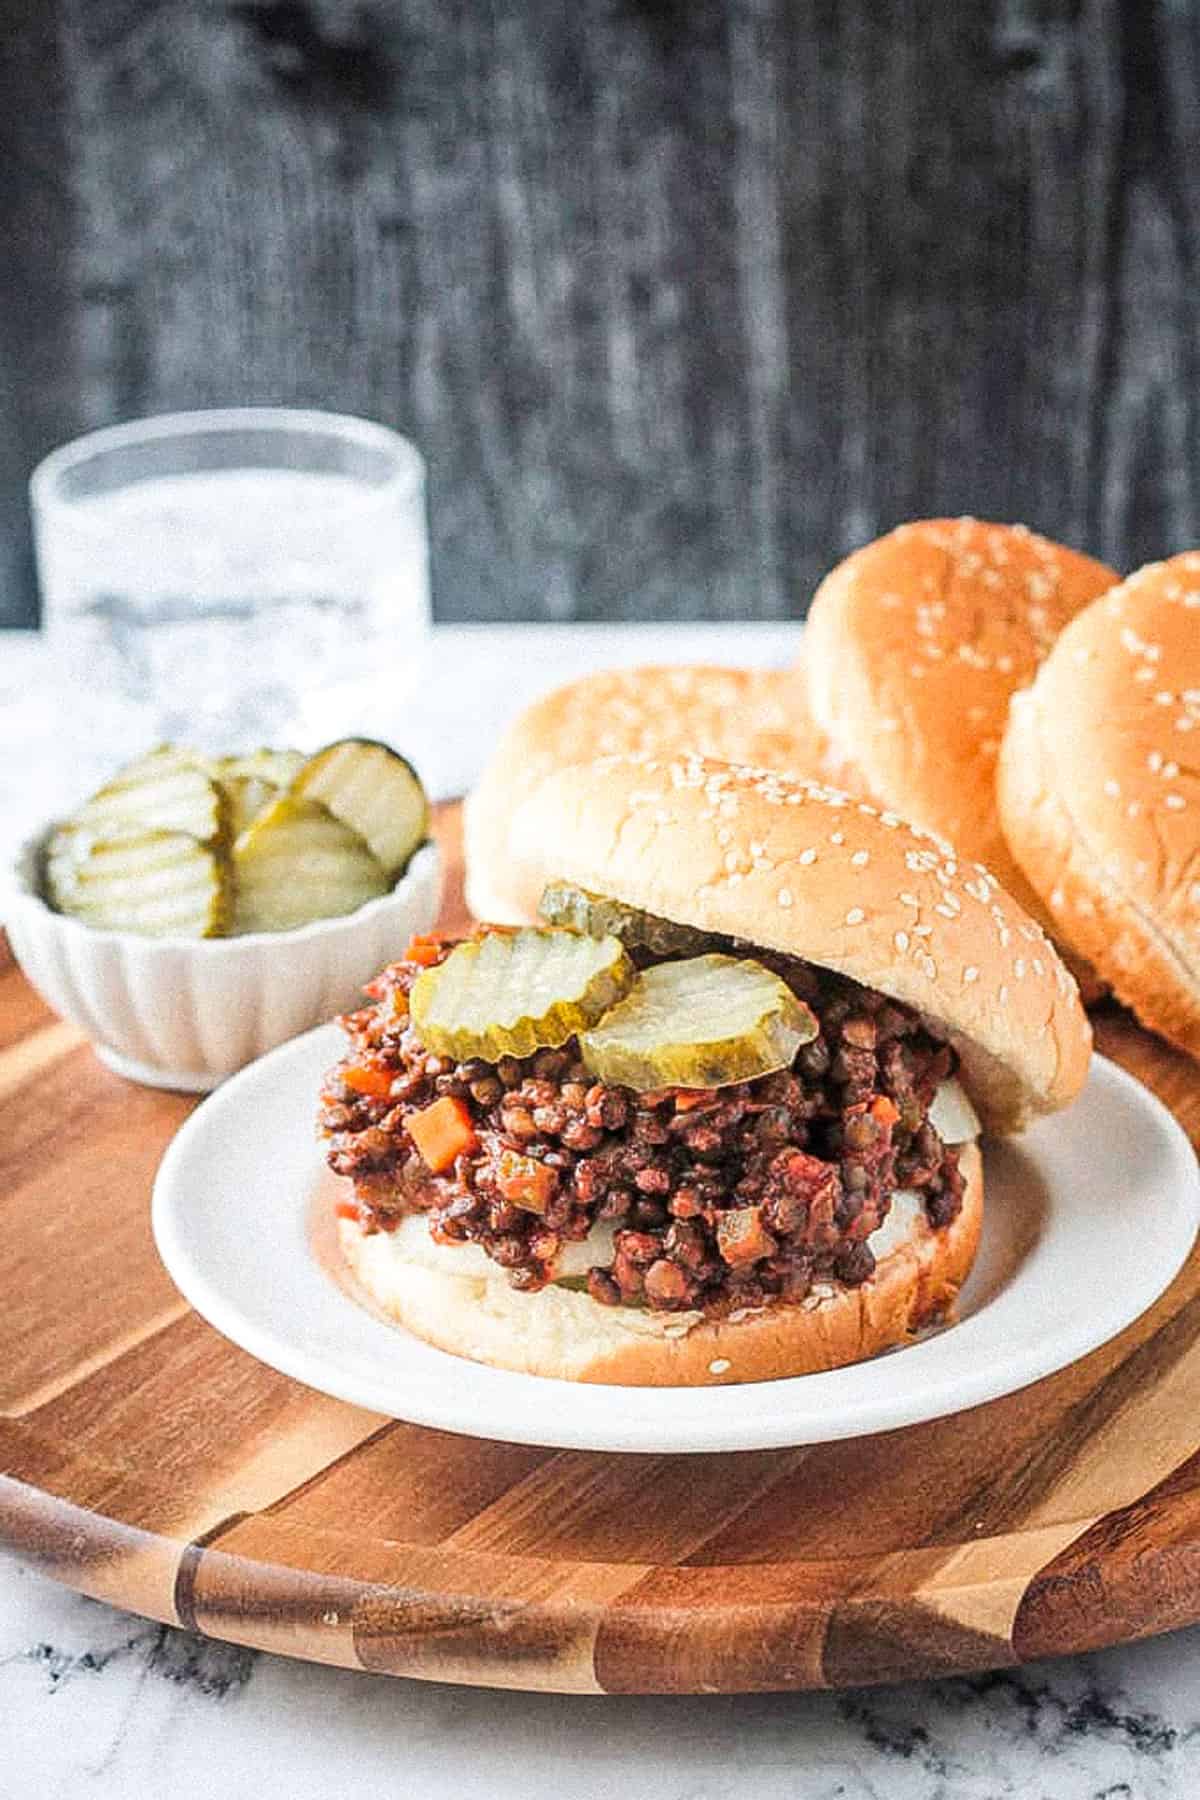 Saucy lentil veggie mixture with pickles and an offset sesame seed bun.